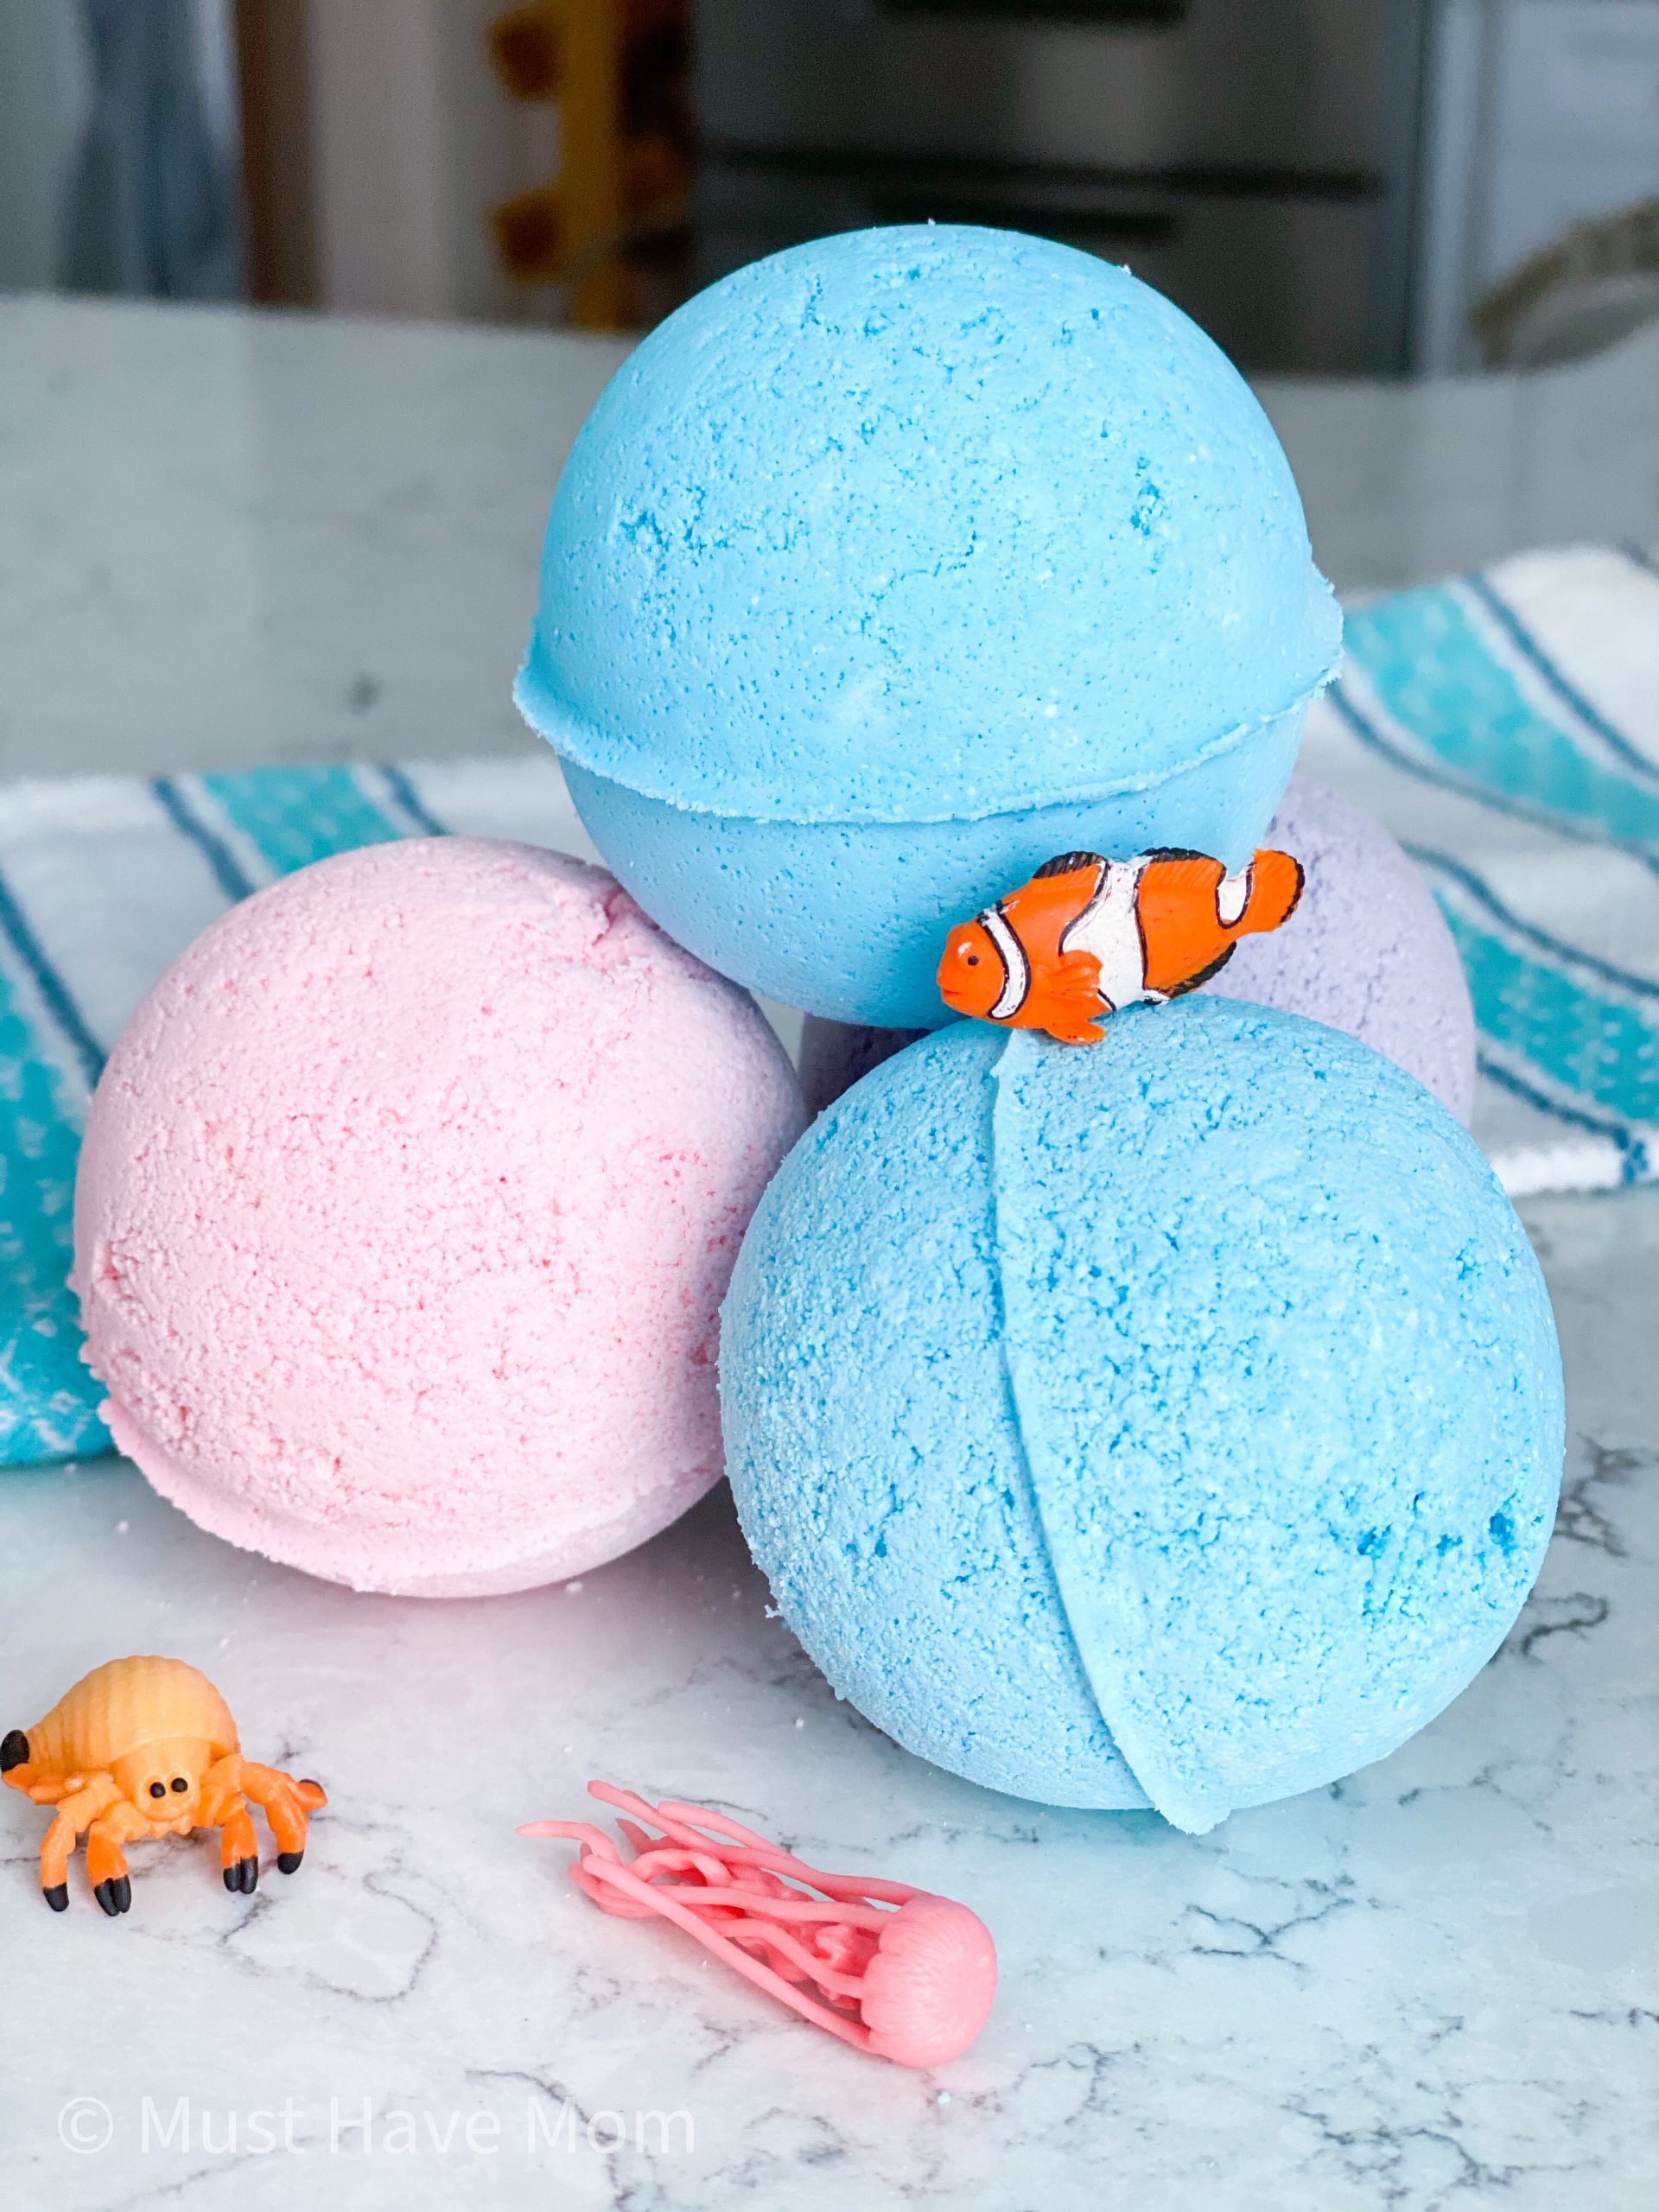 DIY Bath Bombs with Toy Inside - Must Have Mom